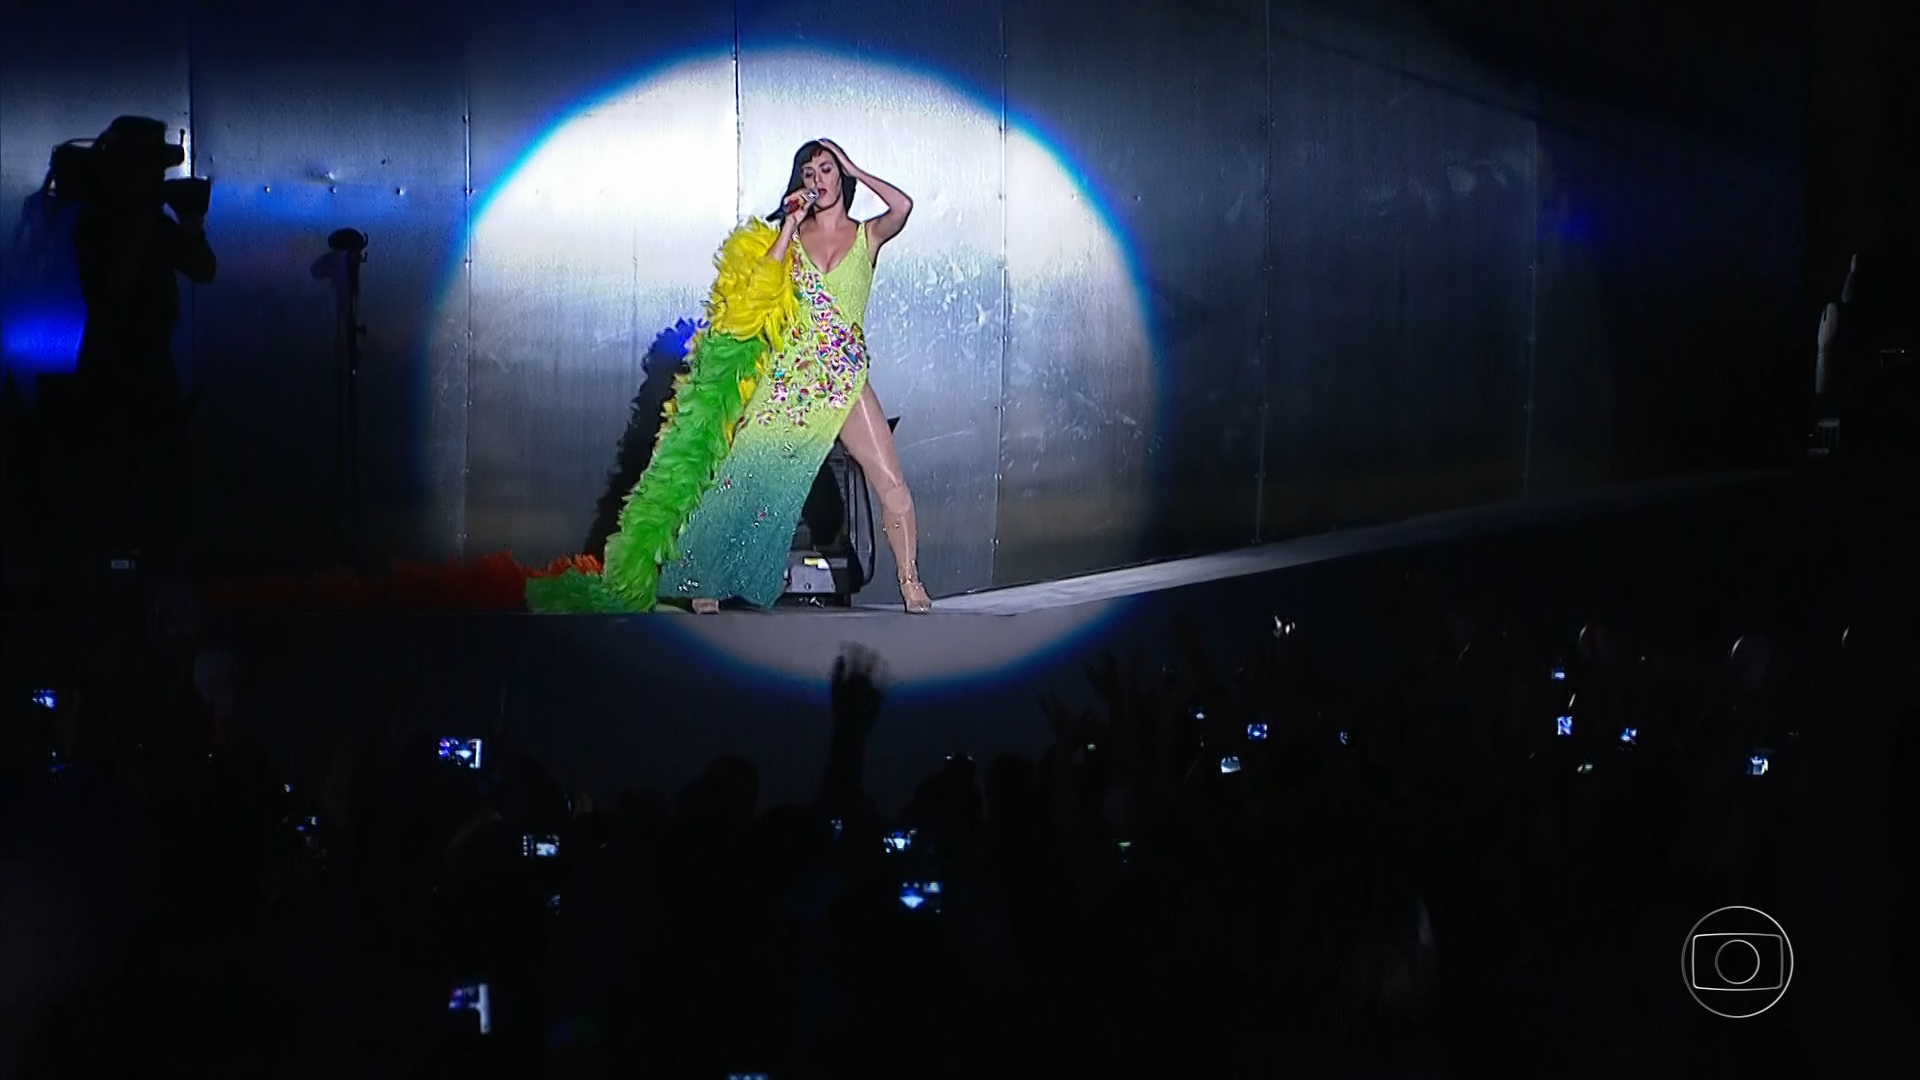  Katy Perry - Rock In Rio 2011-09-24 HDTV 1080its 6a96407ae9ad4b8bd7781cfb9c91978e